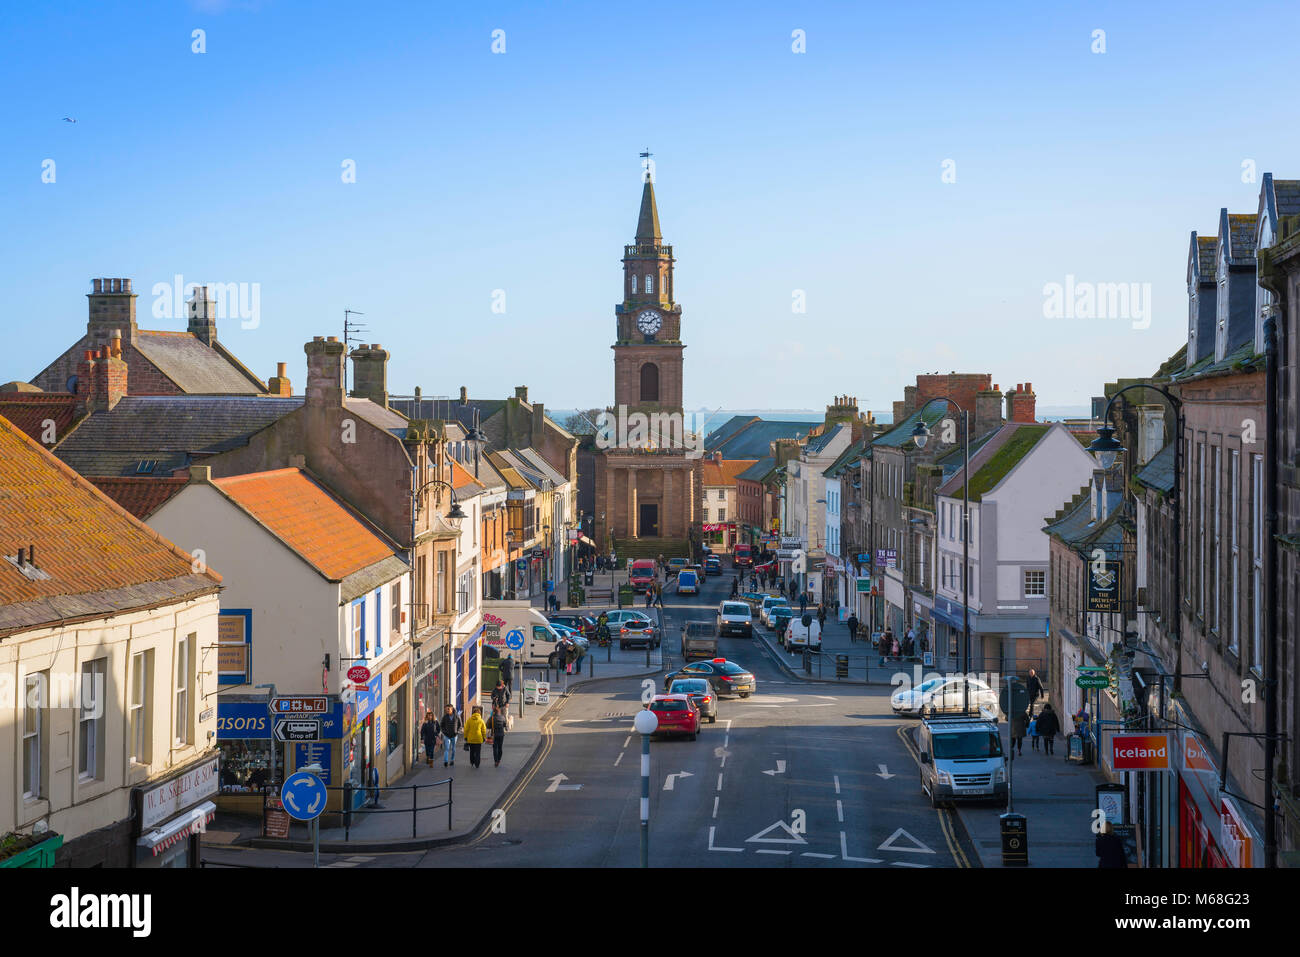 Berwick upon Tweed town, view of the Town Hall in Marygate in the centre of Berwick upon Tweed, Northumberland, England, UK. Stock Photo